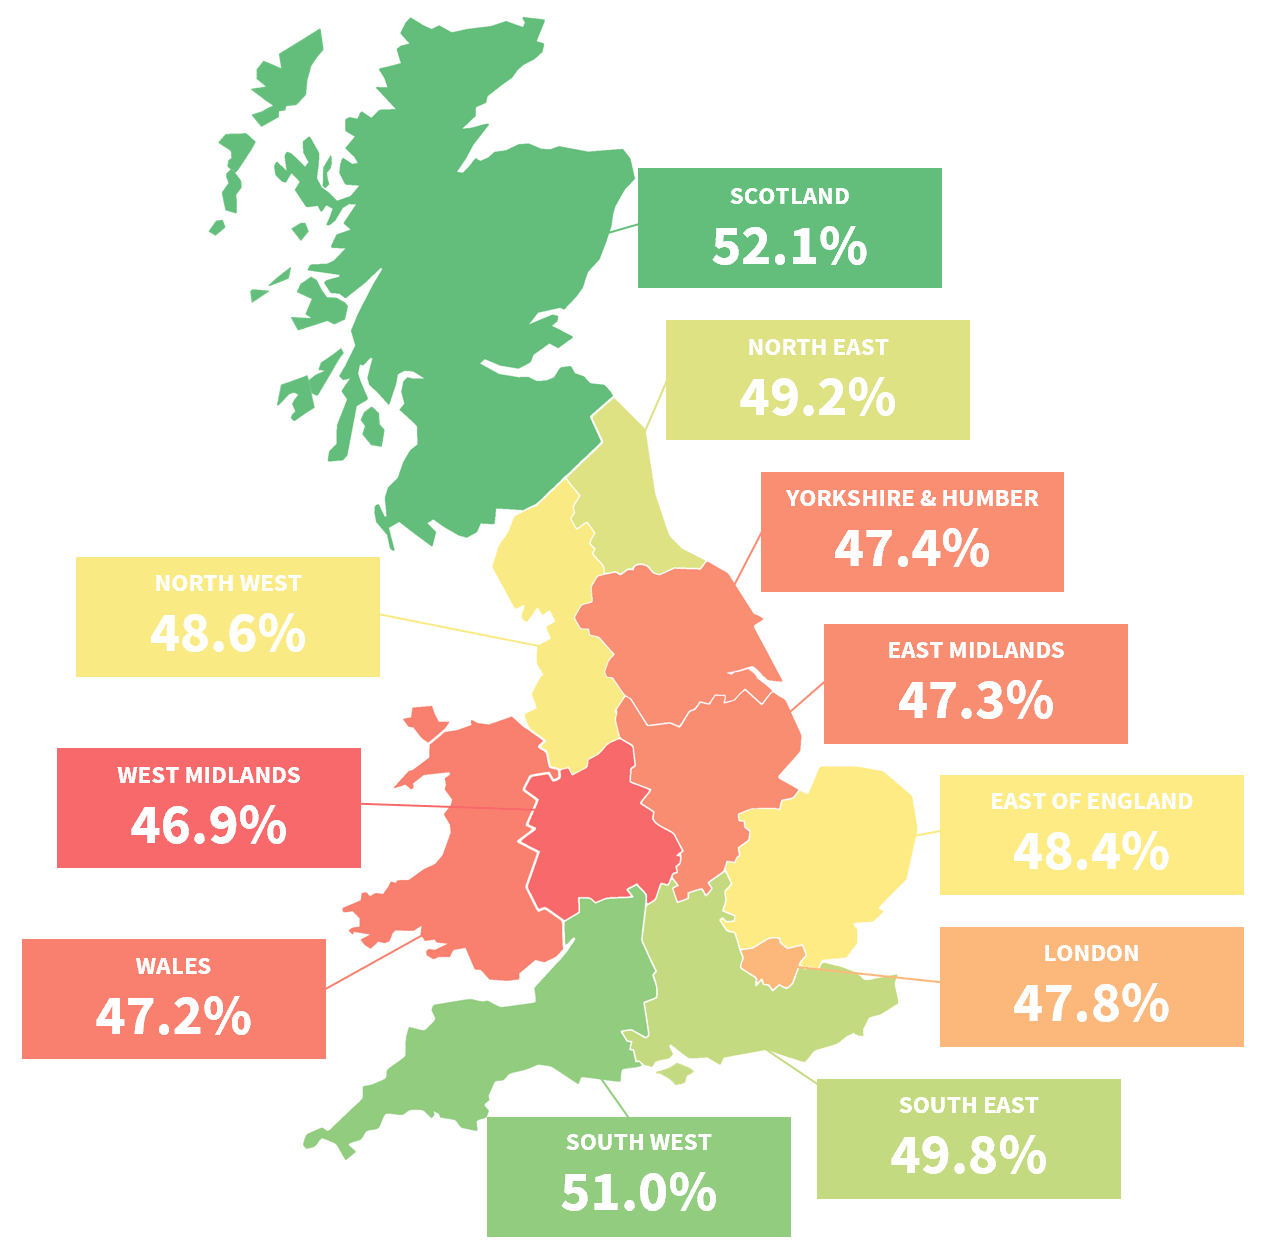 A map with labels showing the theory test pass rates for each region in Great Britain.